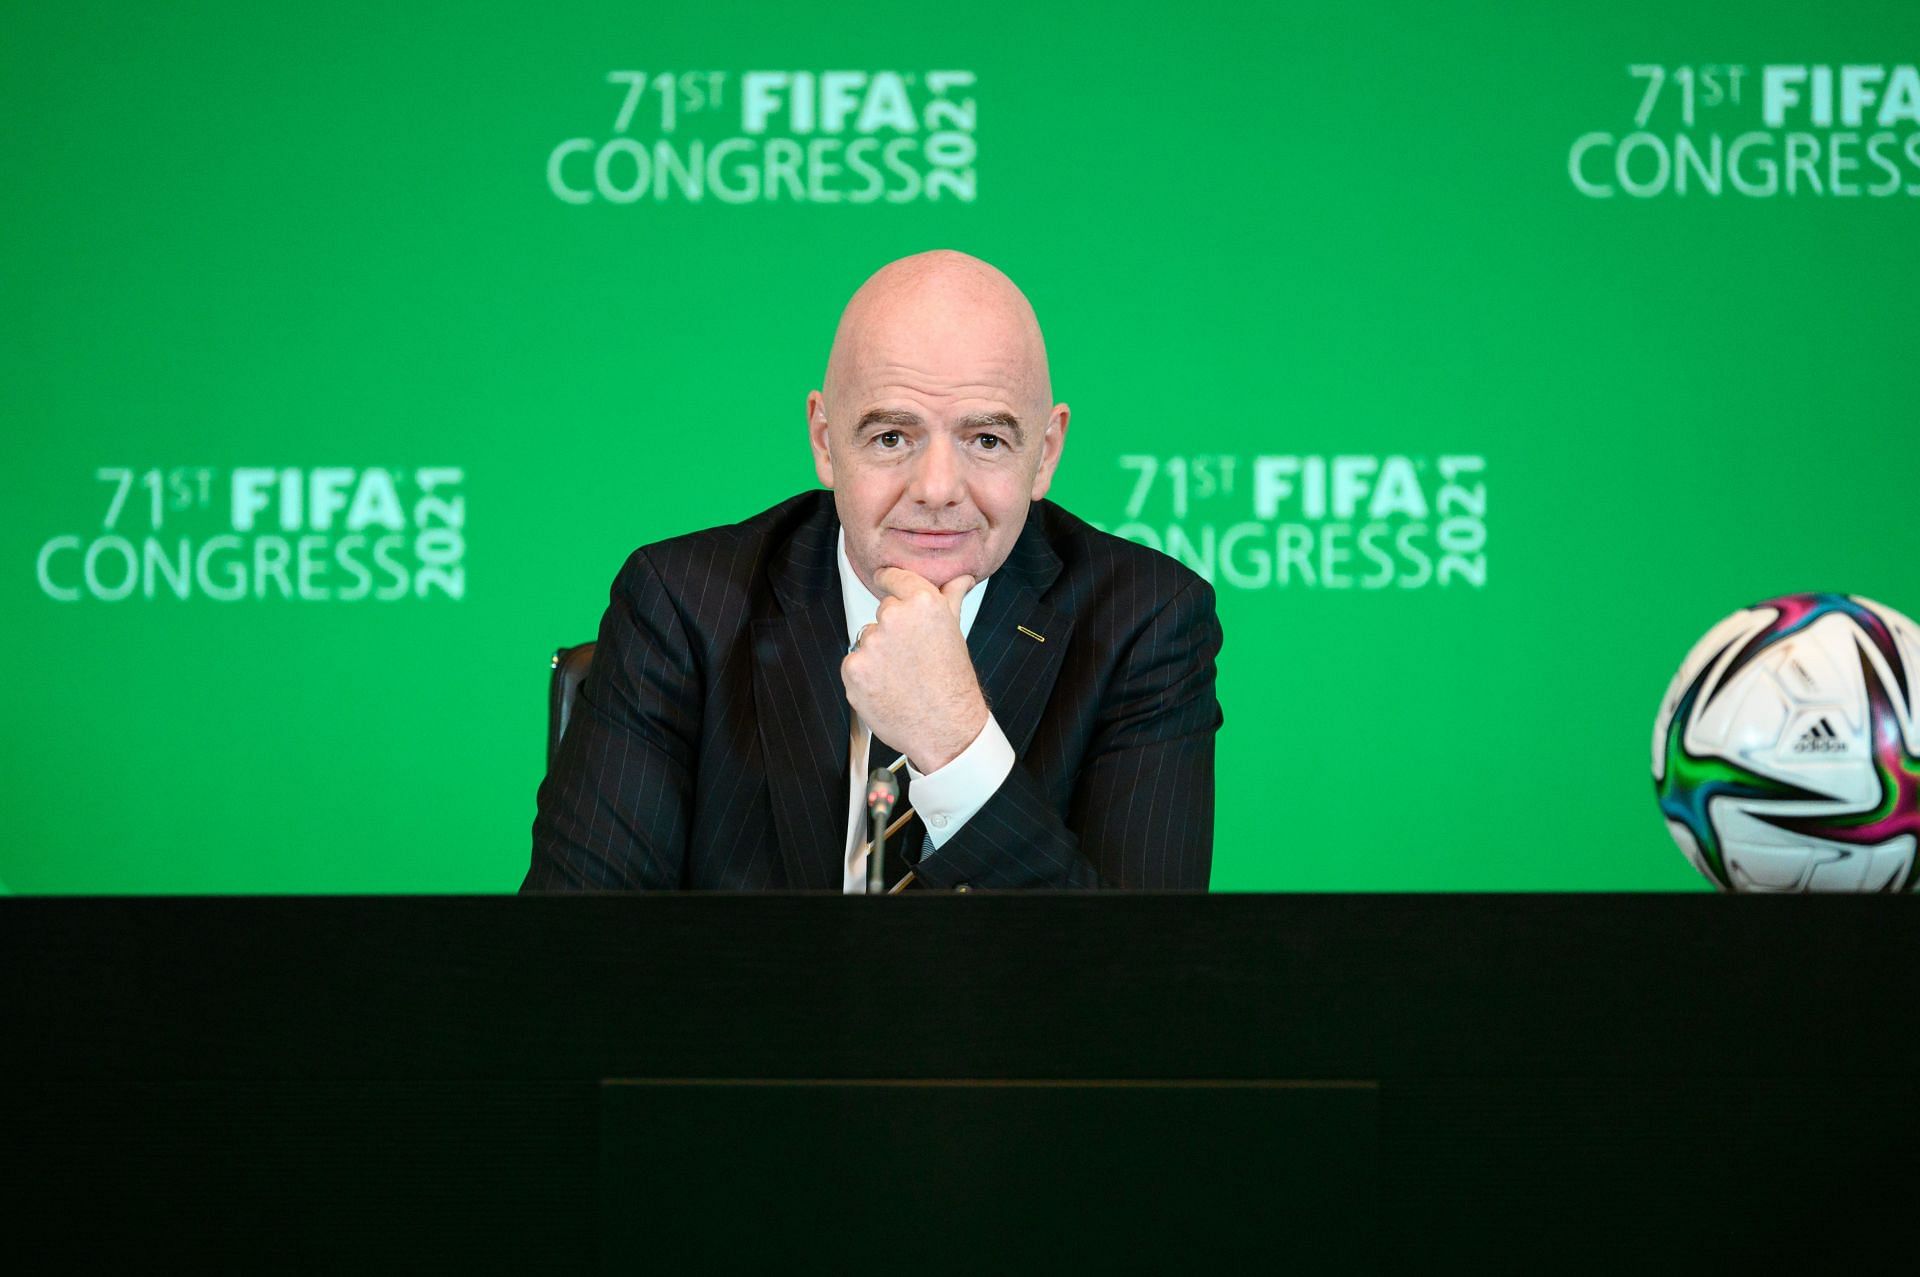 FIFA president Gianni Infantino announced the decision to expel Russia